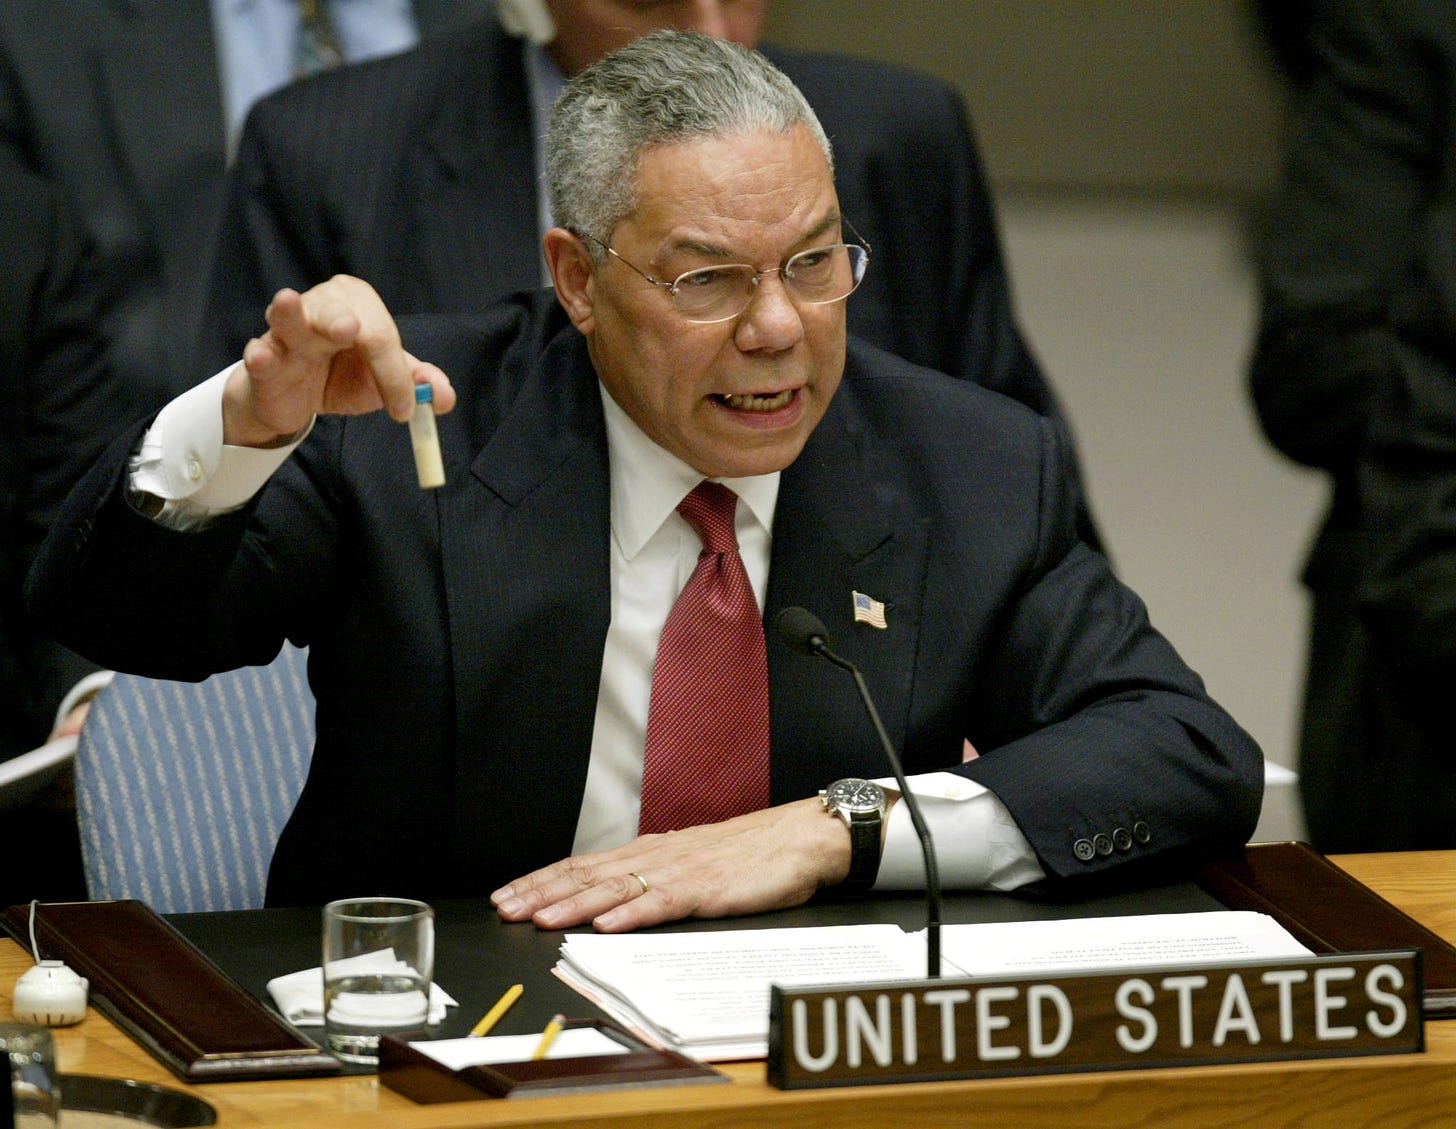 Colin Powell regretted helping launch Iraq War, boosting WMD claims - The  Washington Post